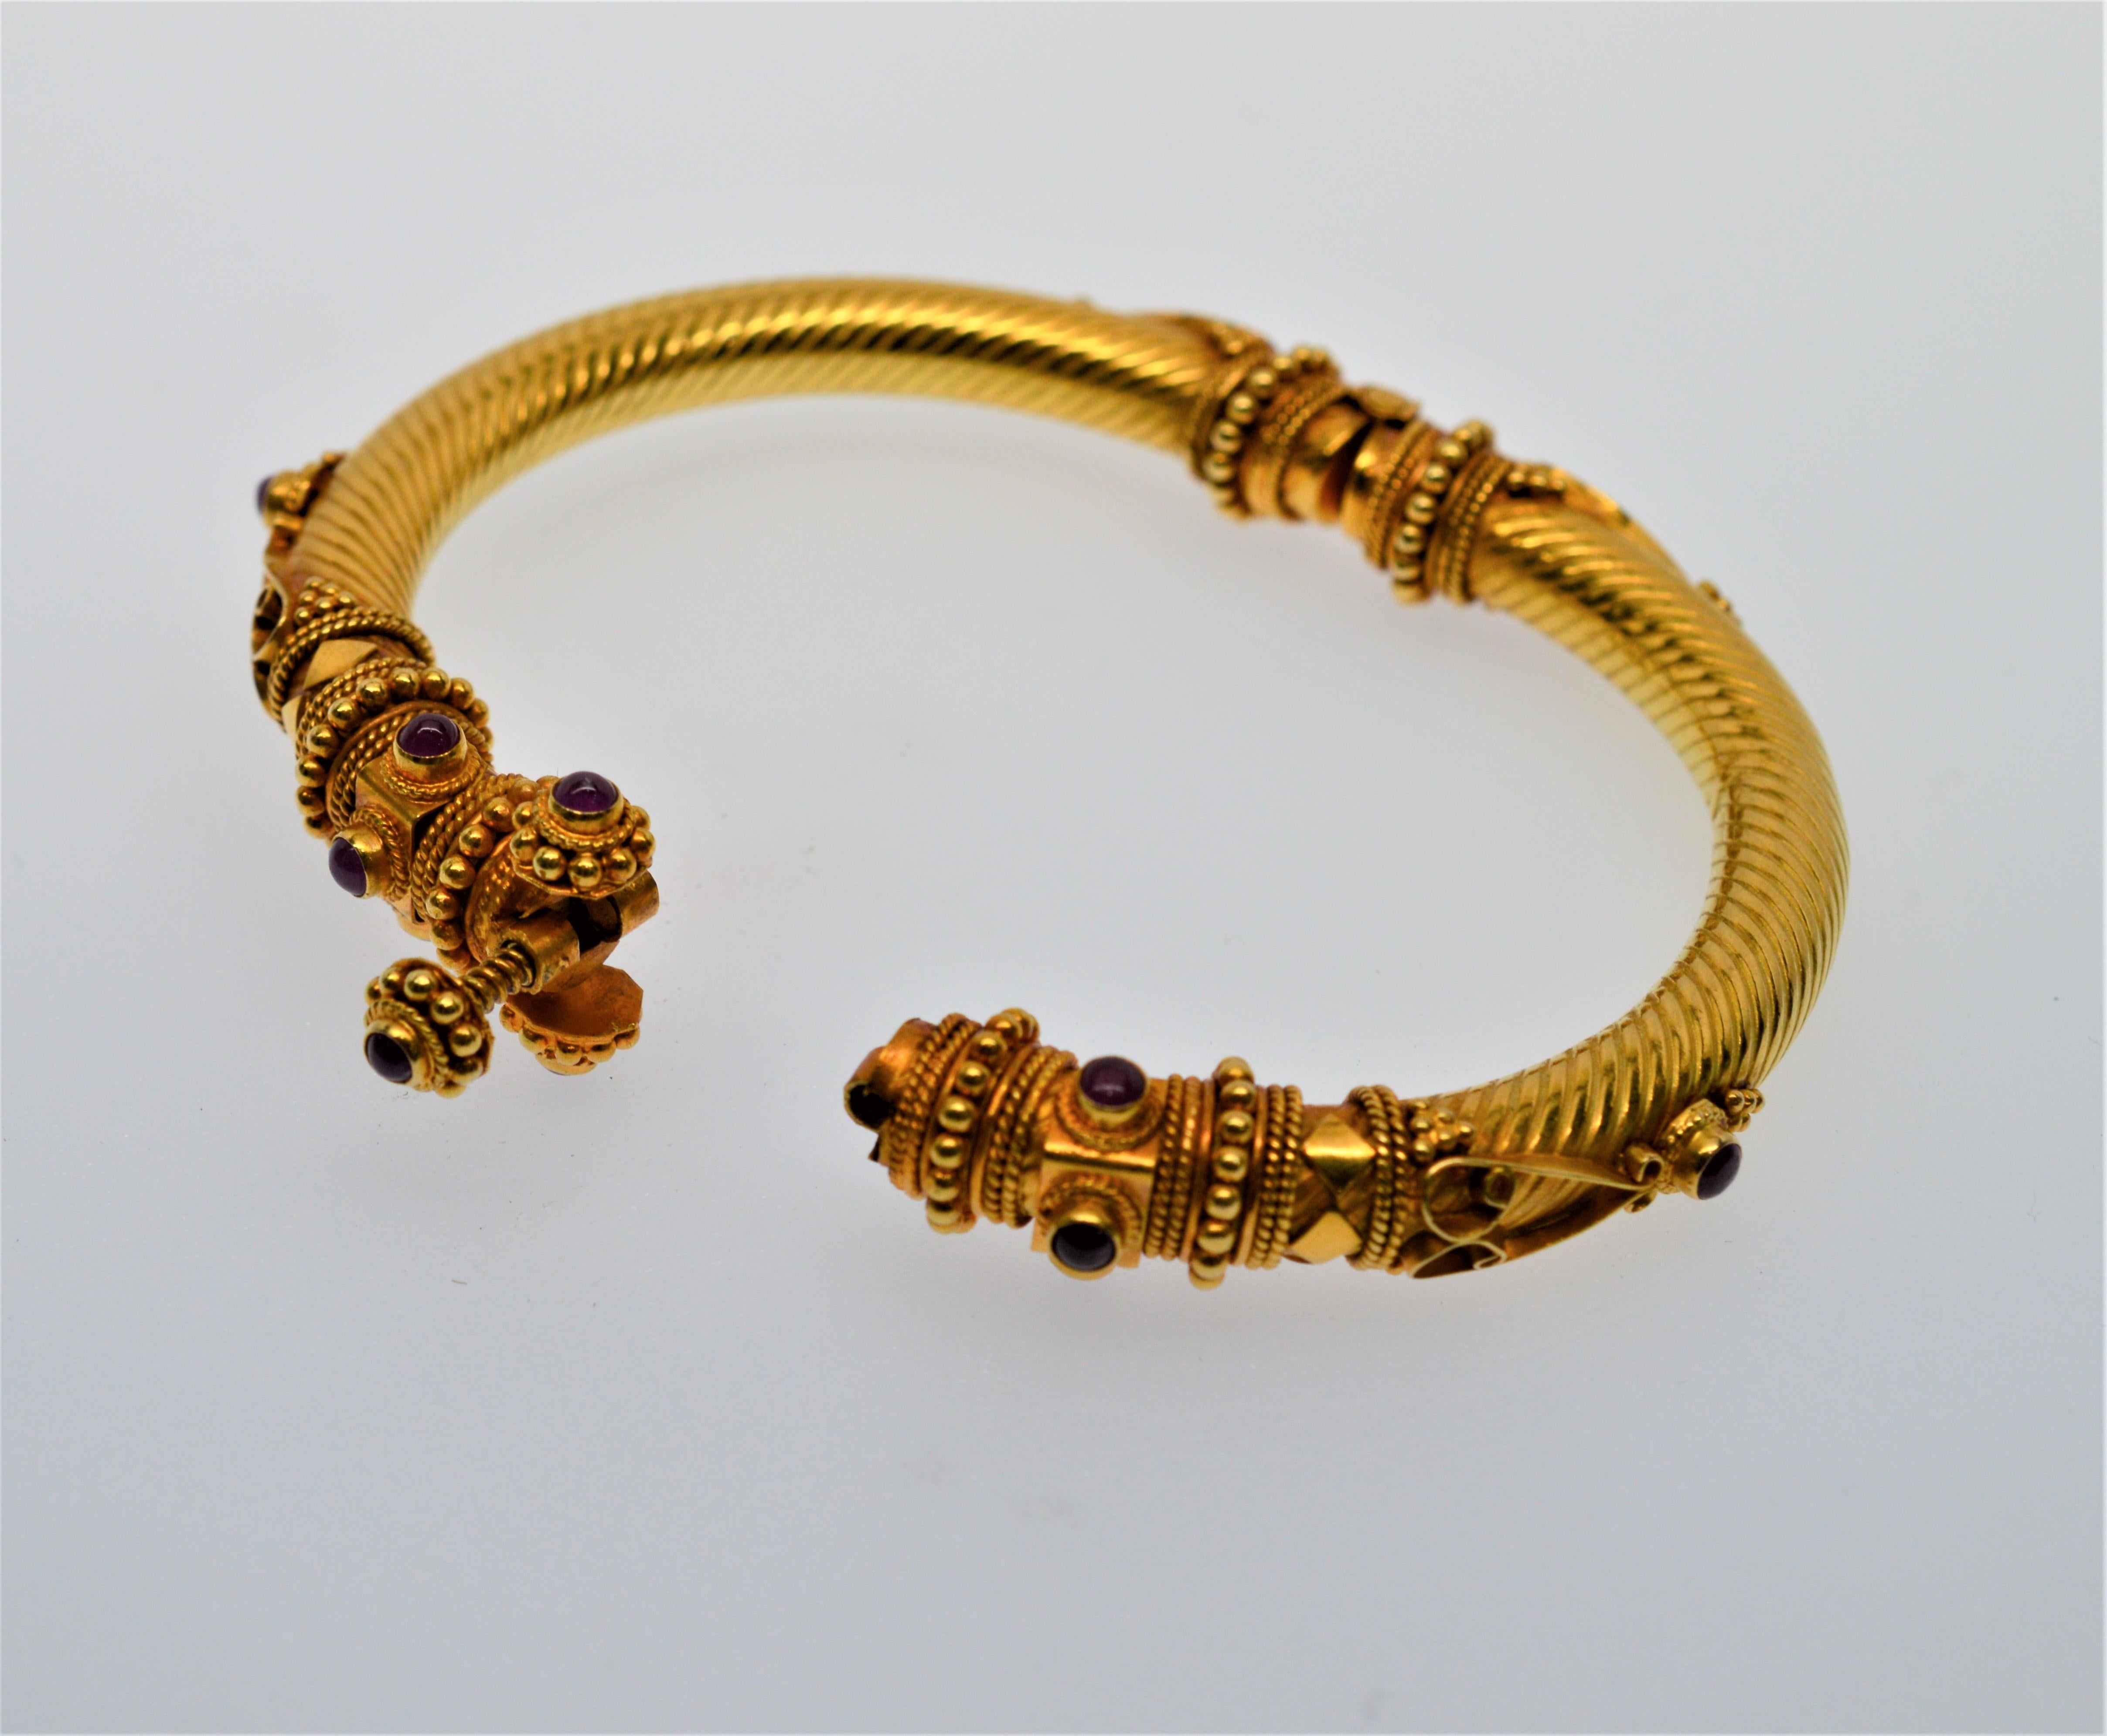 Ruby Cabochon 18 Karat Yellow Gold Bangle Bracelet In Excellent Condition For Sale In Mount Kisco, NY